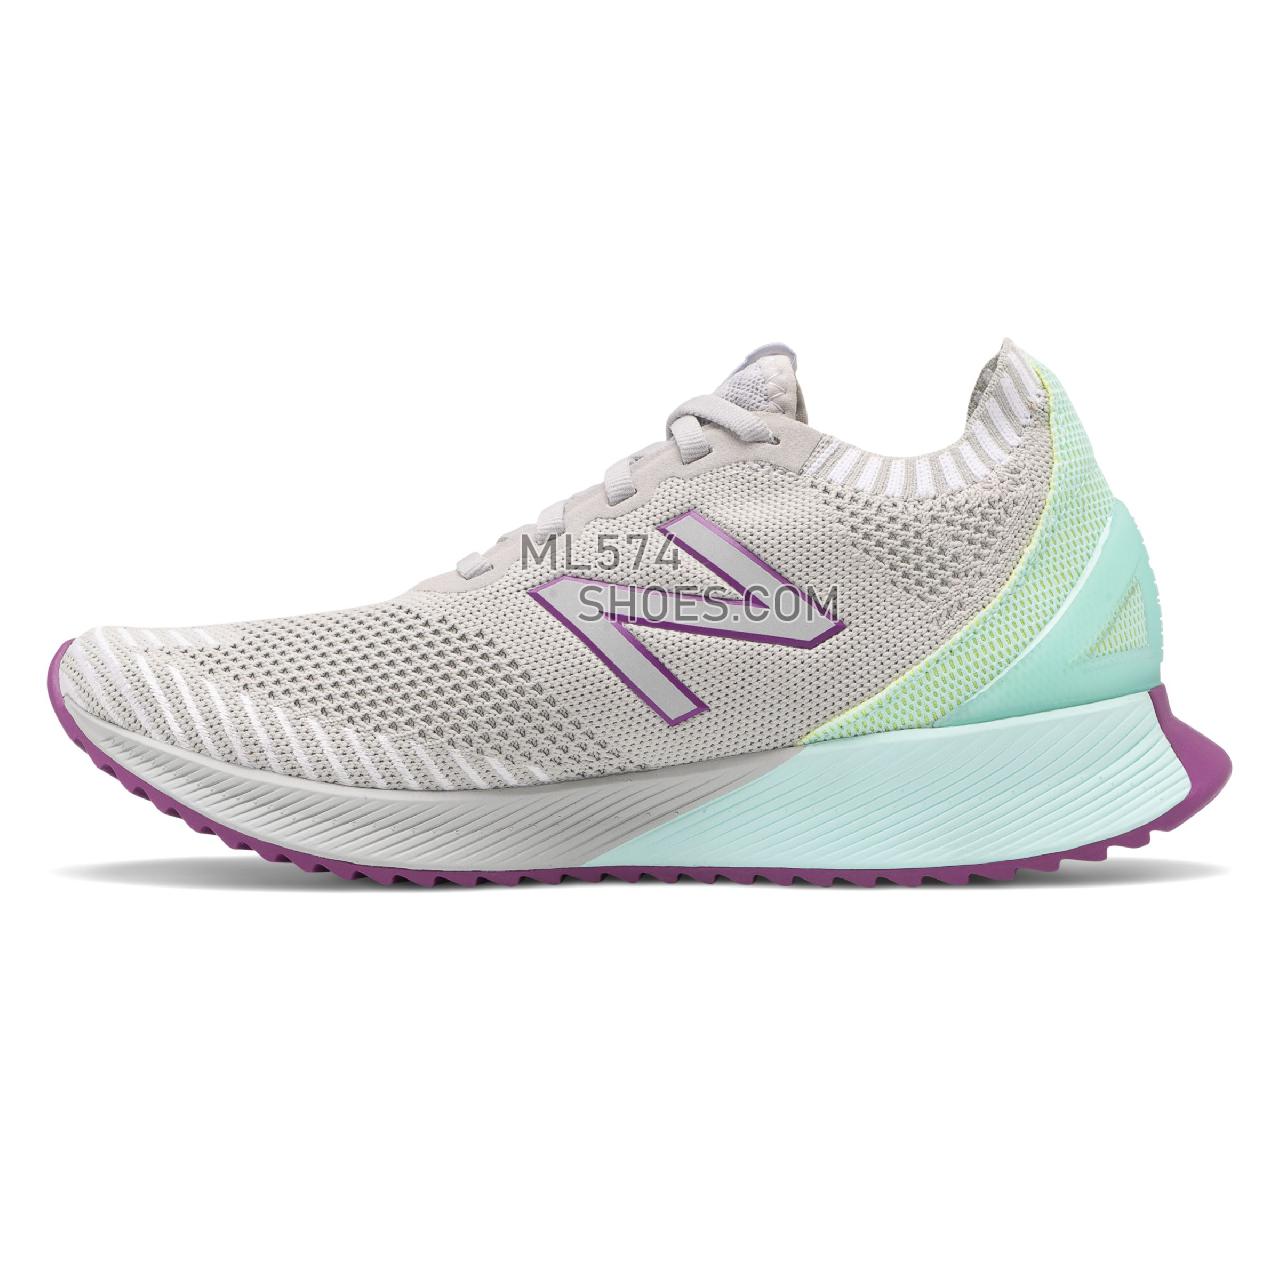 New Balance FuelCell Echo - Women's FuelCell Echo Performance Running - Light Aluminum with Bali Blue and Lemon Slush - WFCECCG